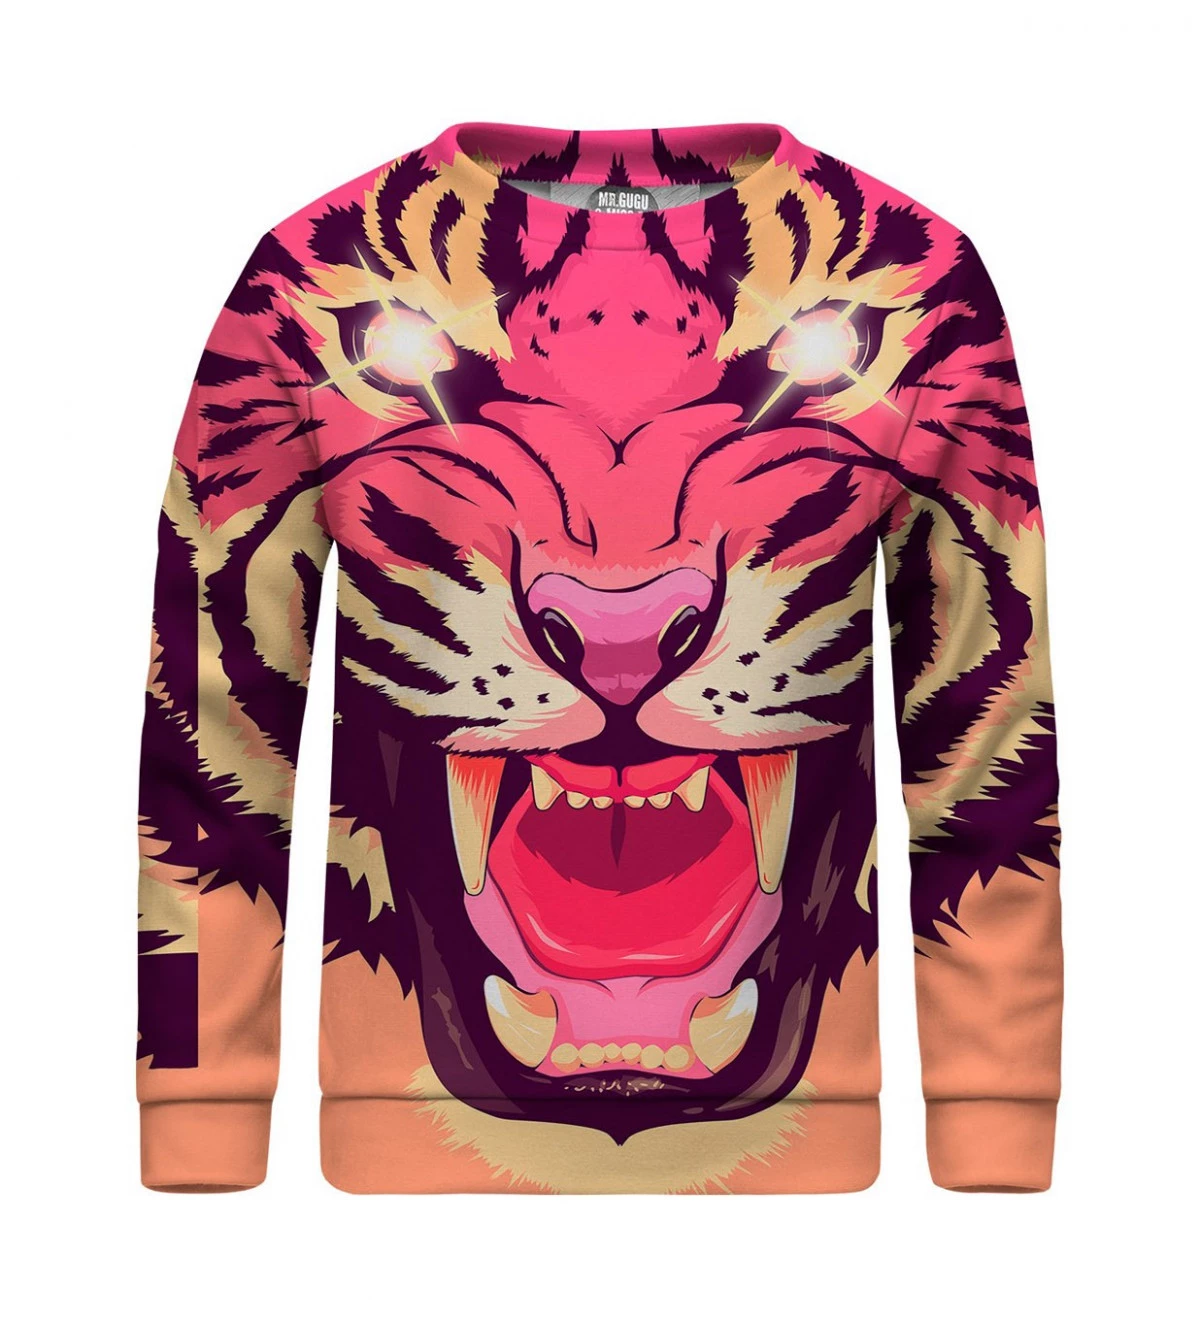 Comic Tiger sweater for kids